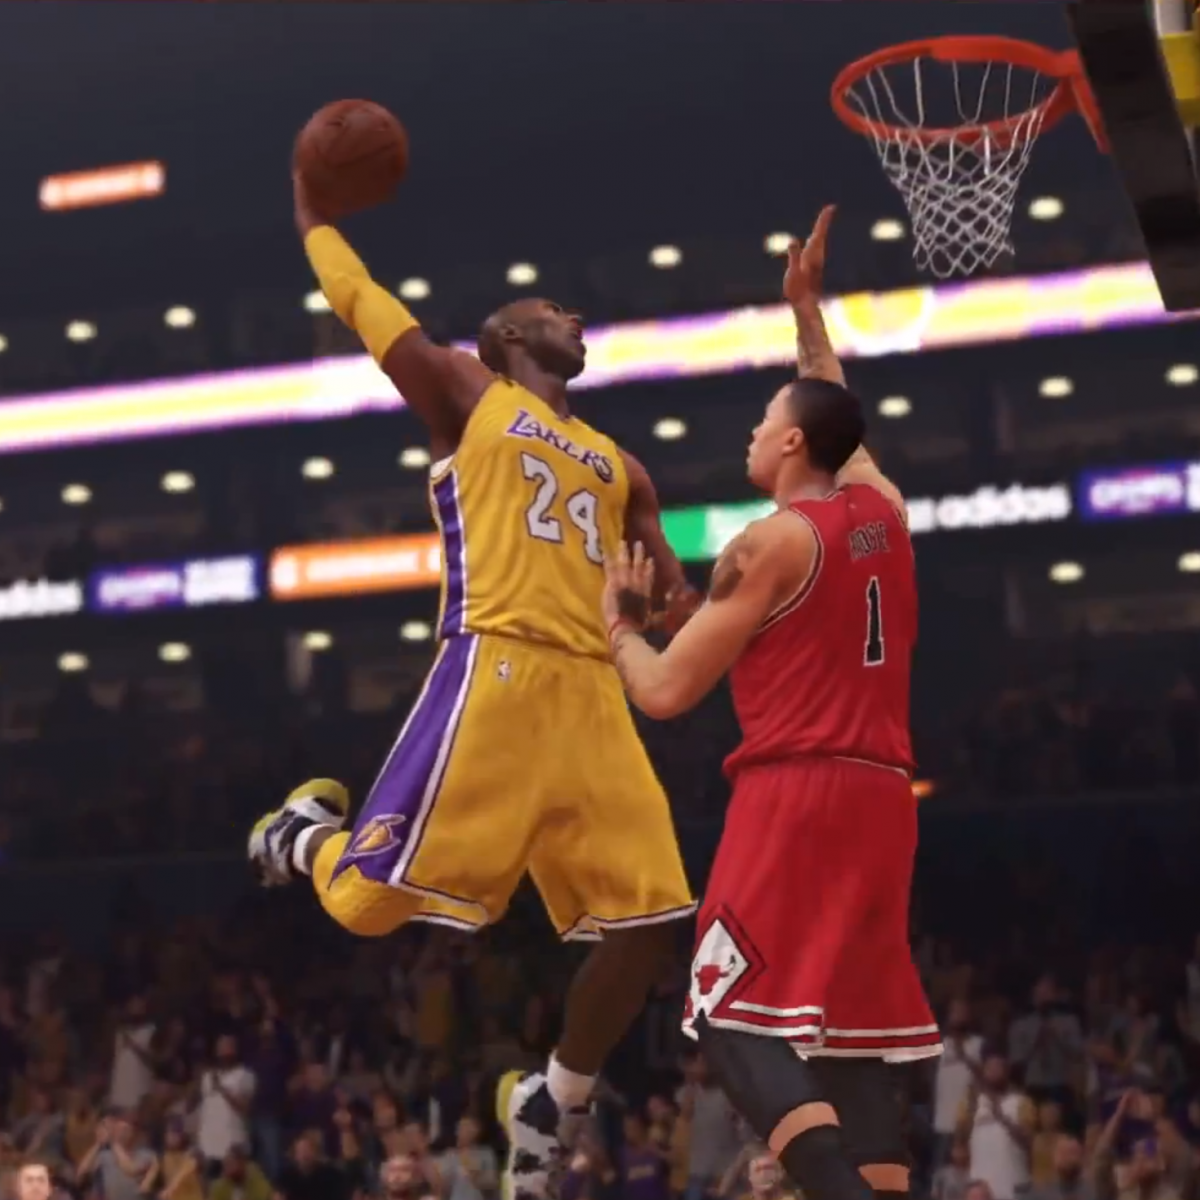 Nba 2k14 2k Sports Releases Opening Night Roster Bleacher Report Latest News Videos And Highlights